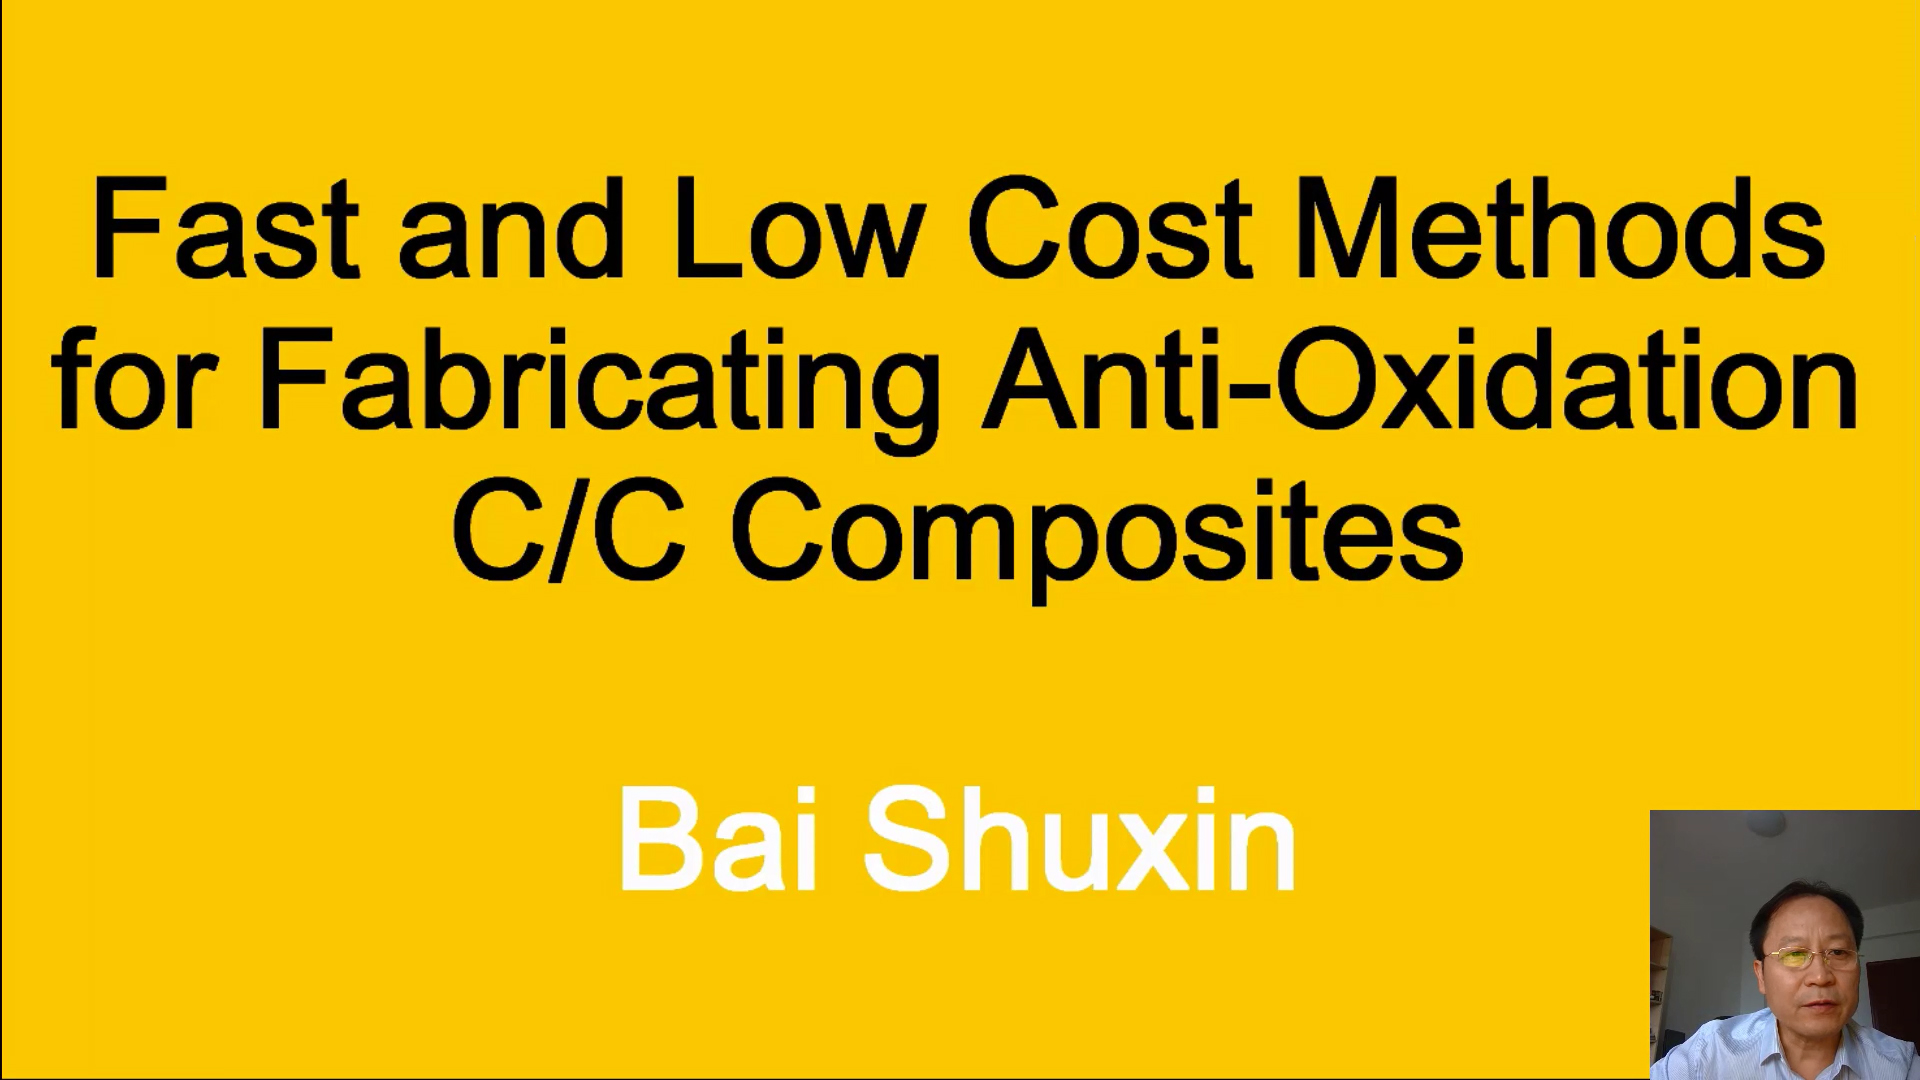 Fast and Low Cost Methods for Fabricating Anti-Oxidation C/C Composites